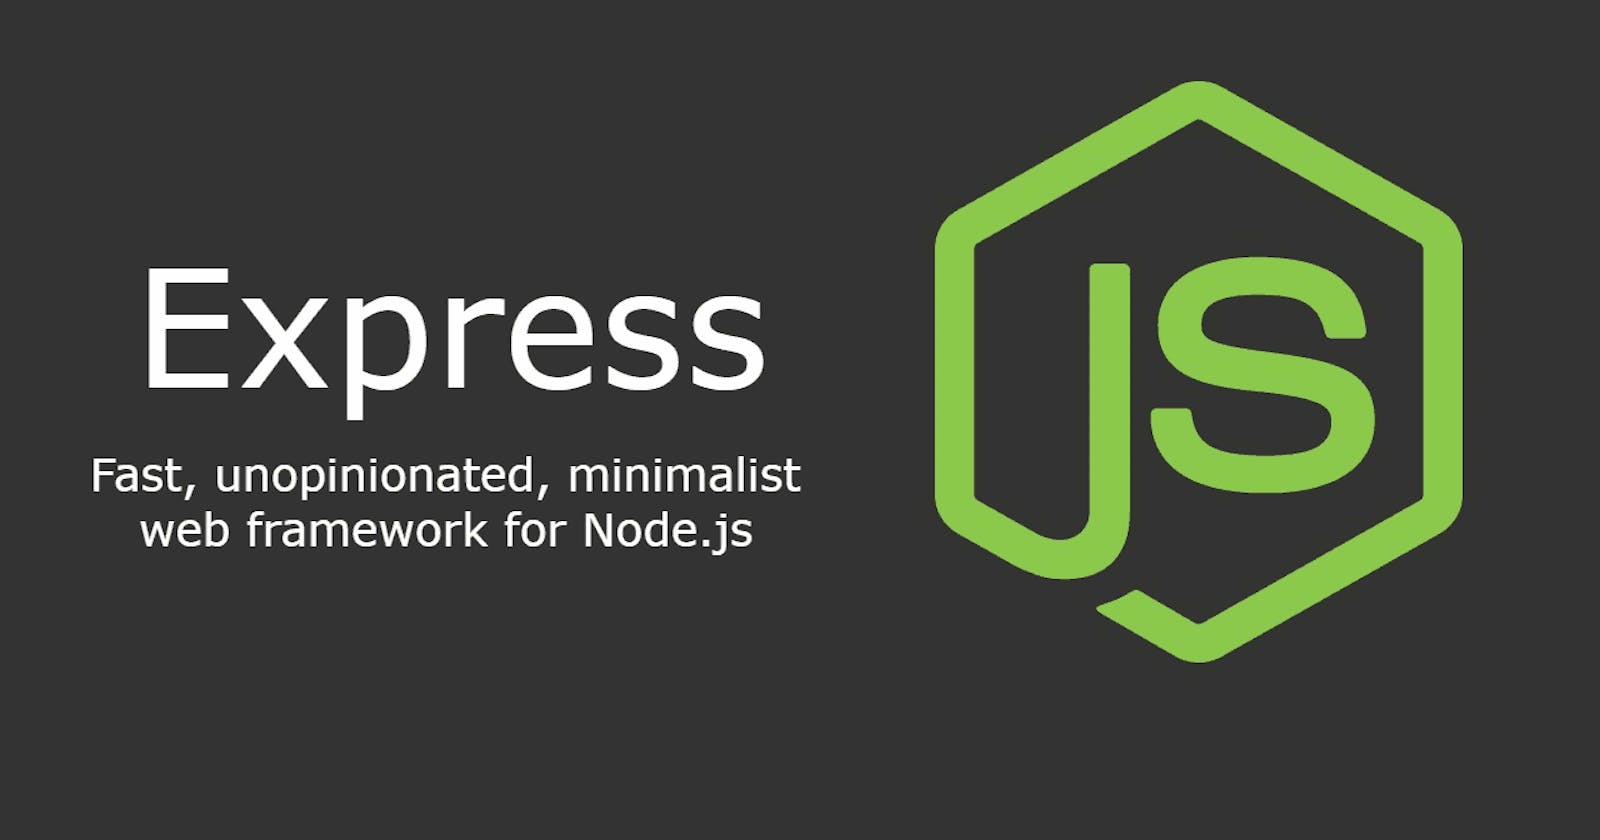 A comprehensive introduction to Express JS